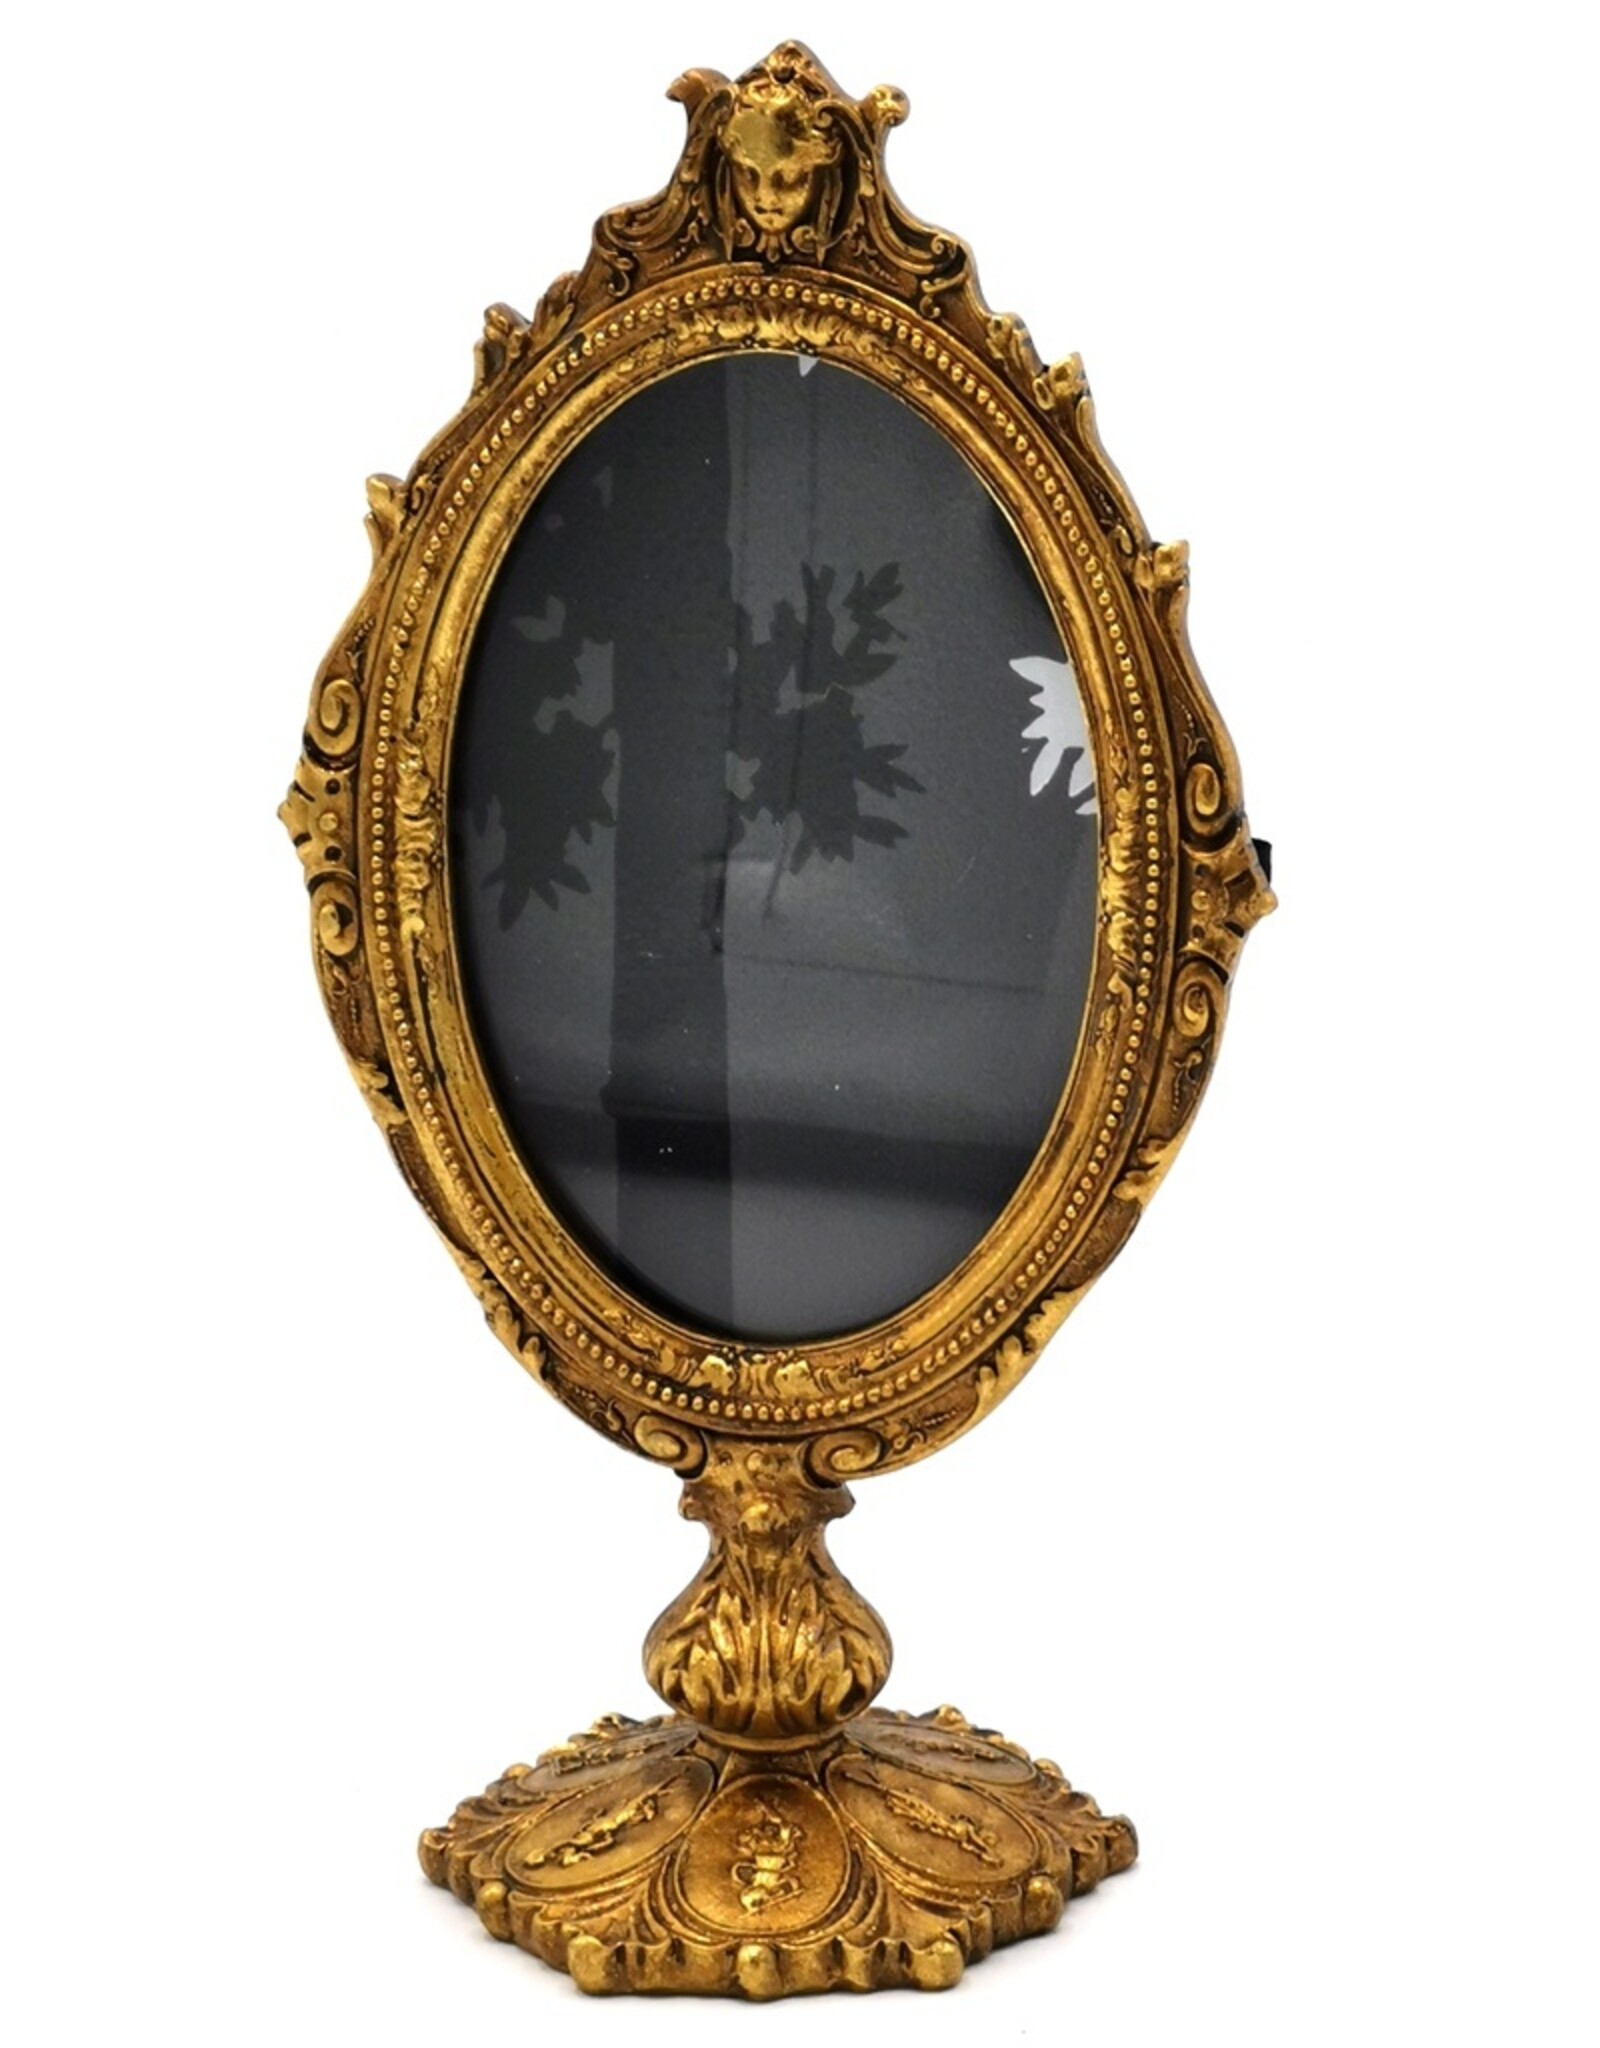 Trukado Miscellaneous - Photo frame Baroque style Oval on stand